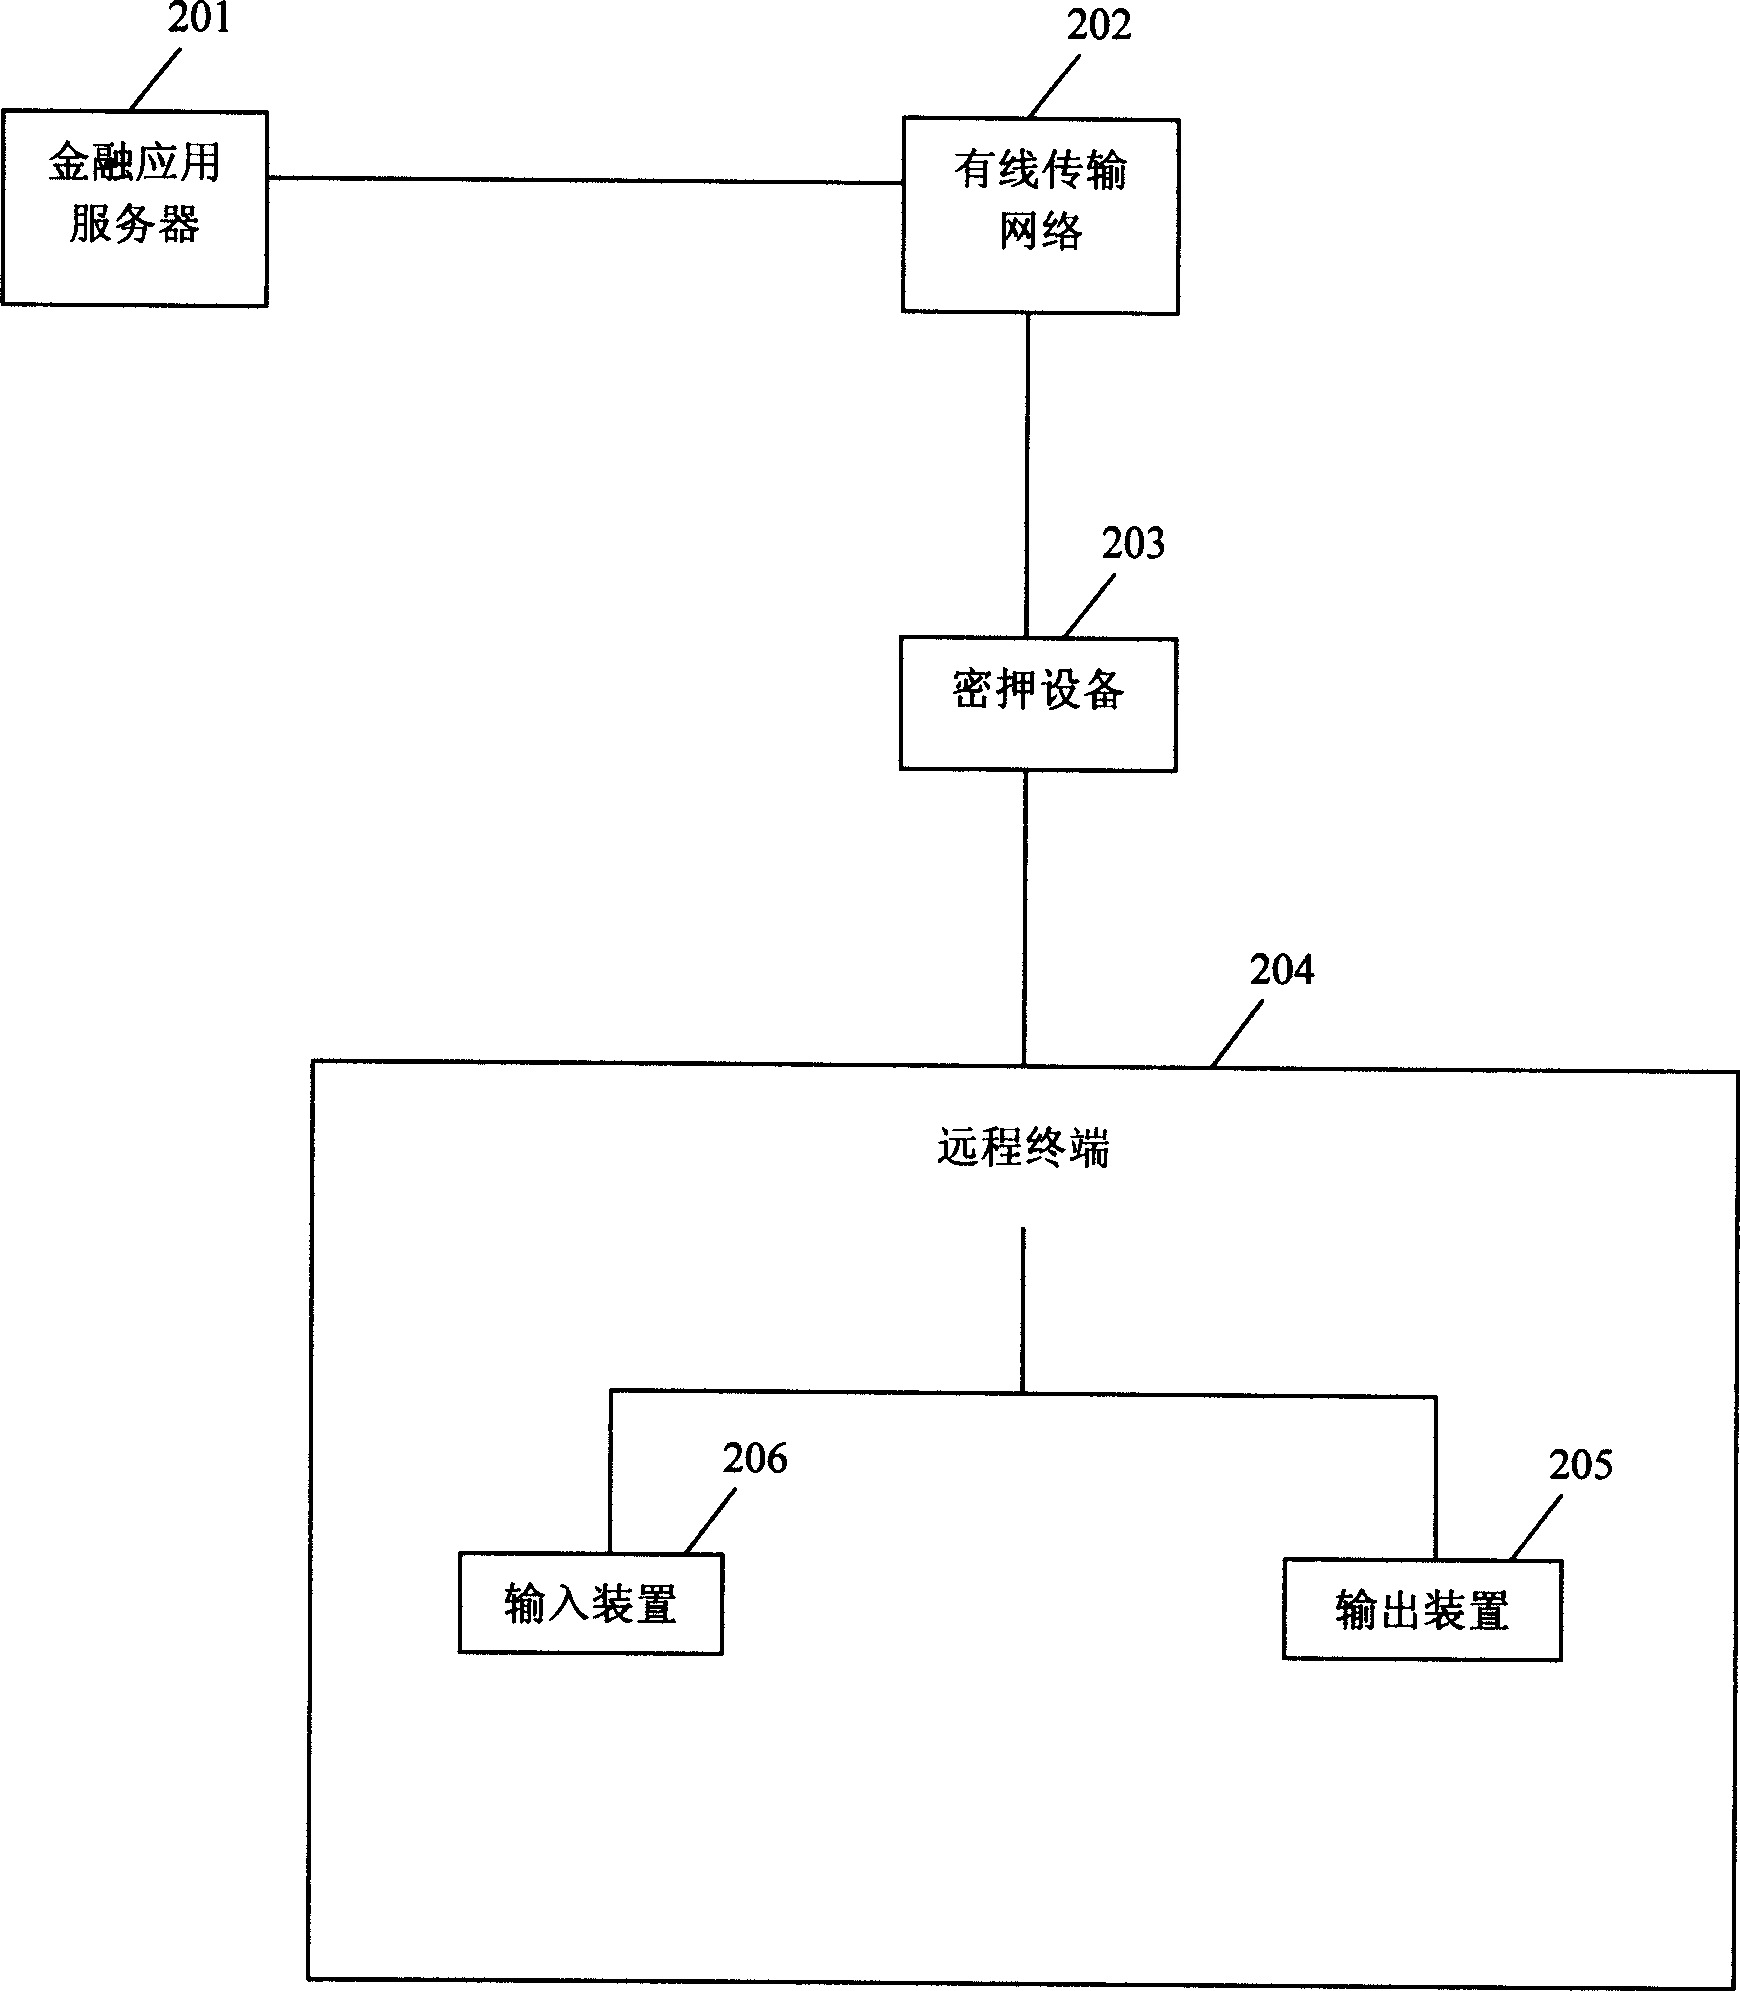 Method and system for providing straight-through bank financial service